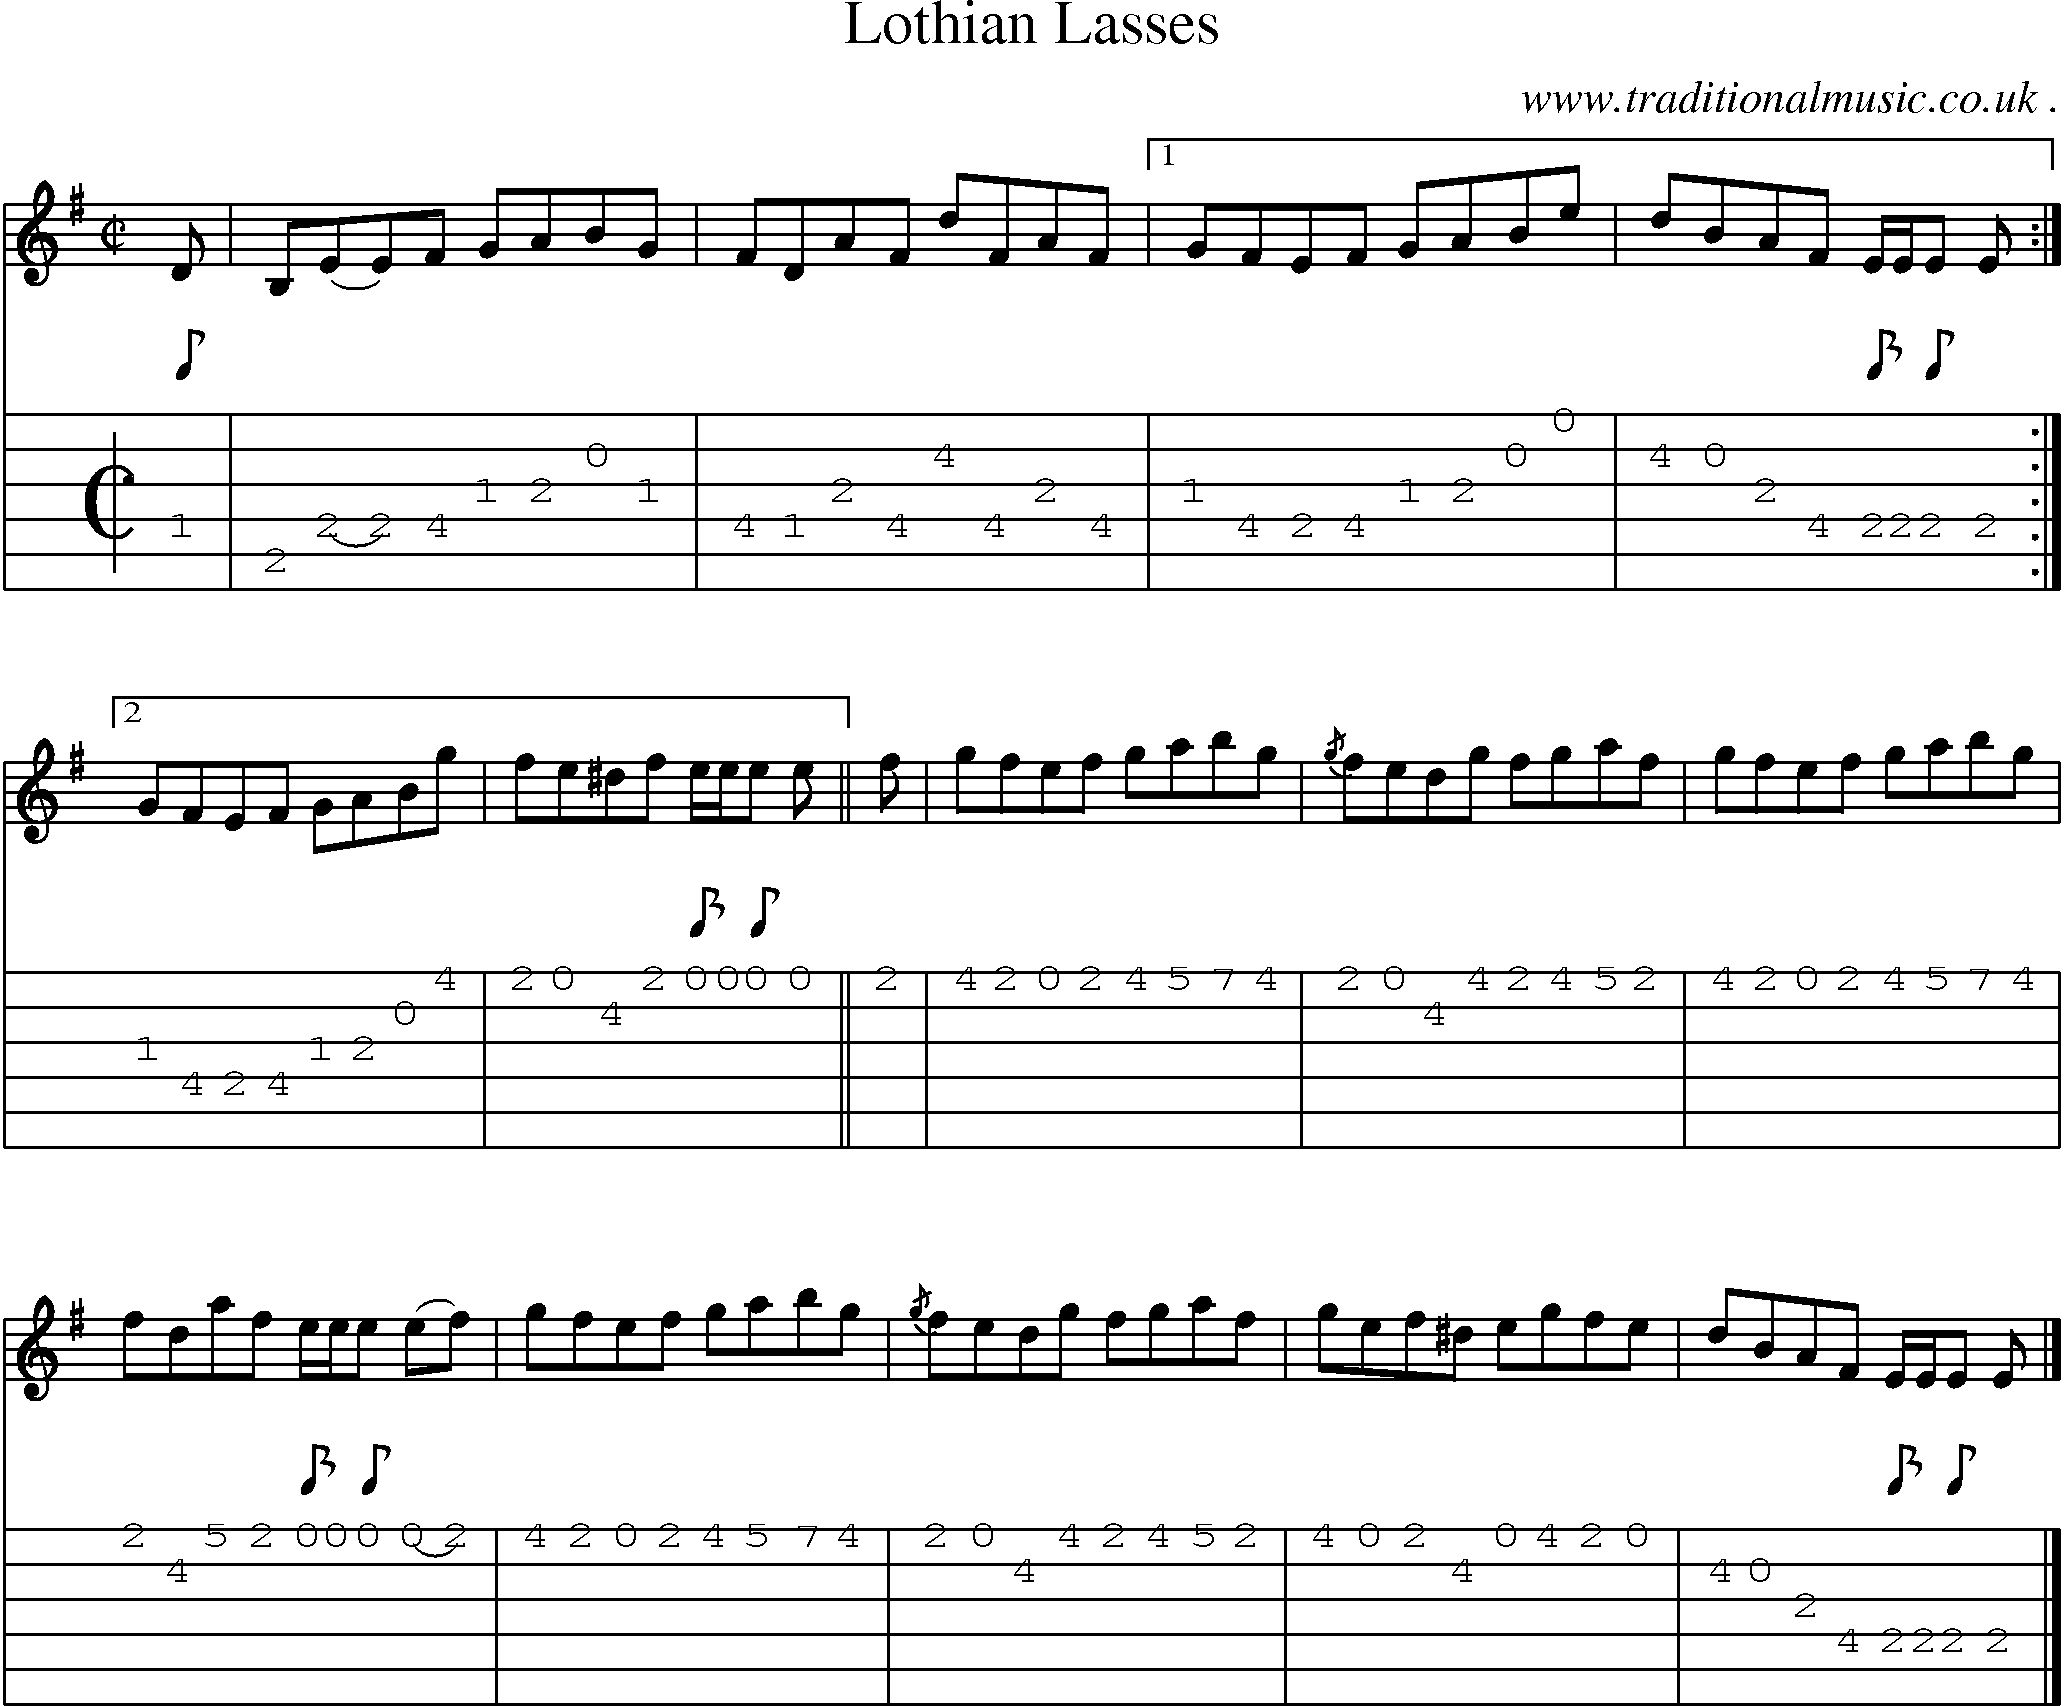 Sheet-music  score, Chords and Guitar Tabs for Lothian Lasses